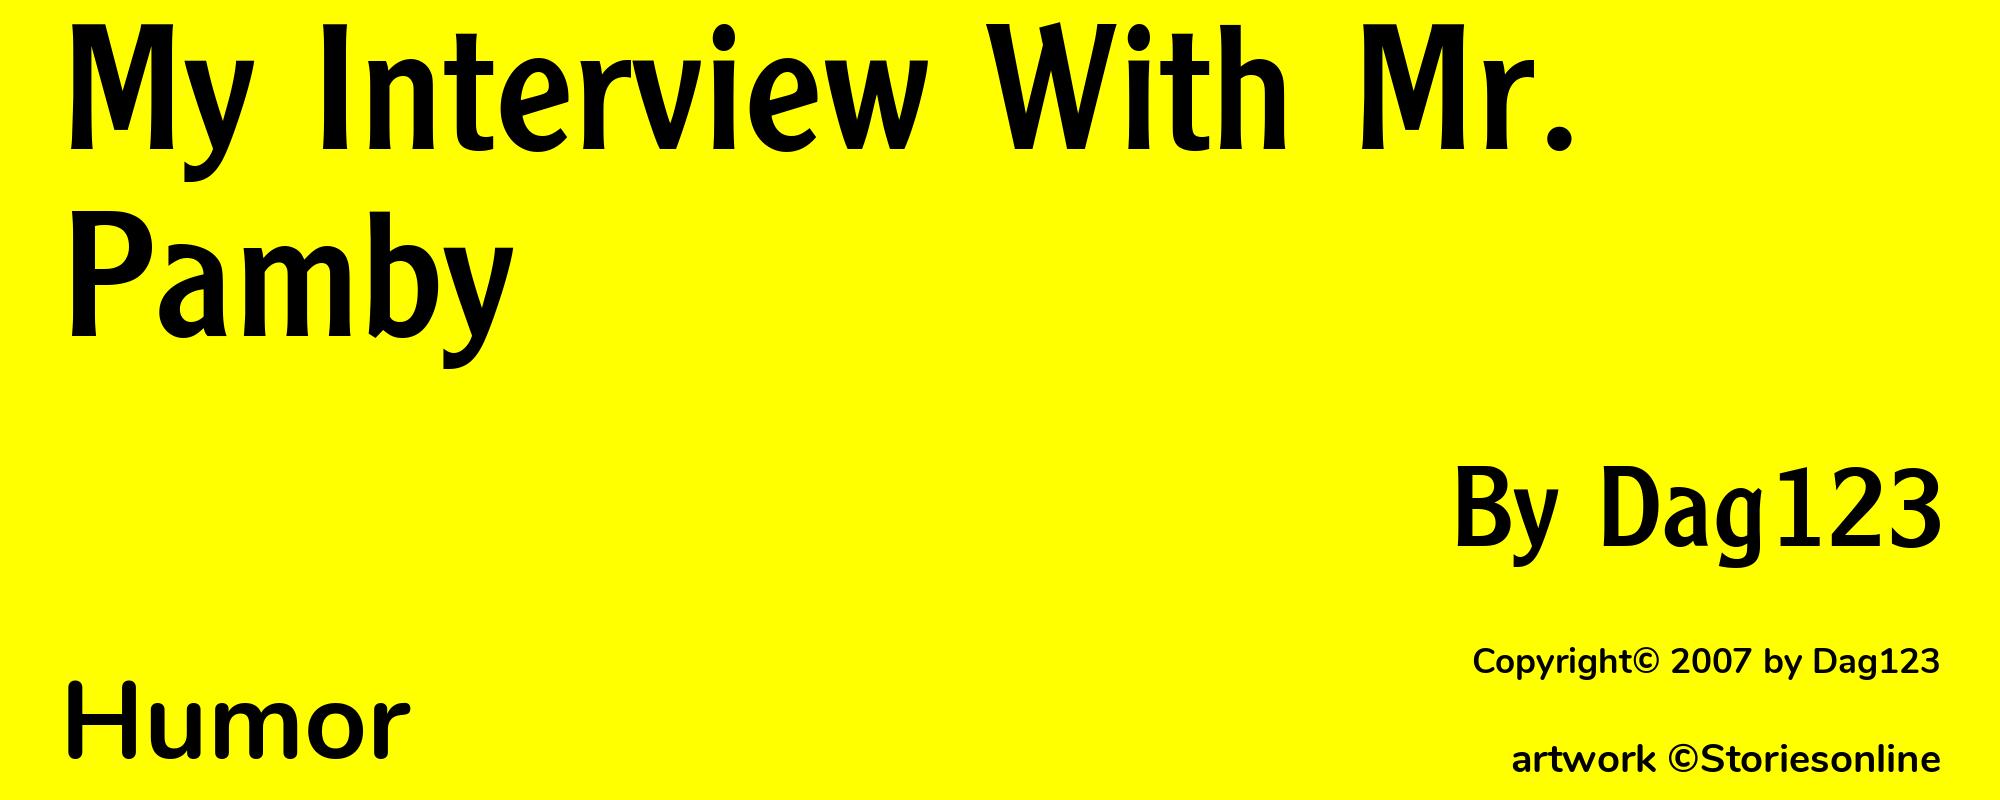 My Interview With Mr. Pamby - Cover